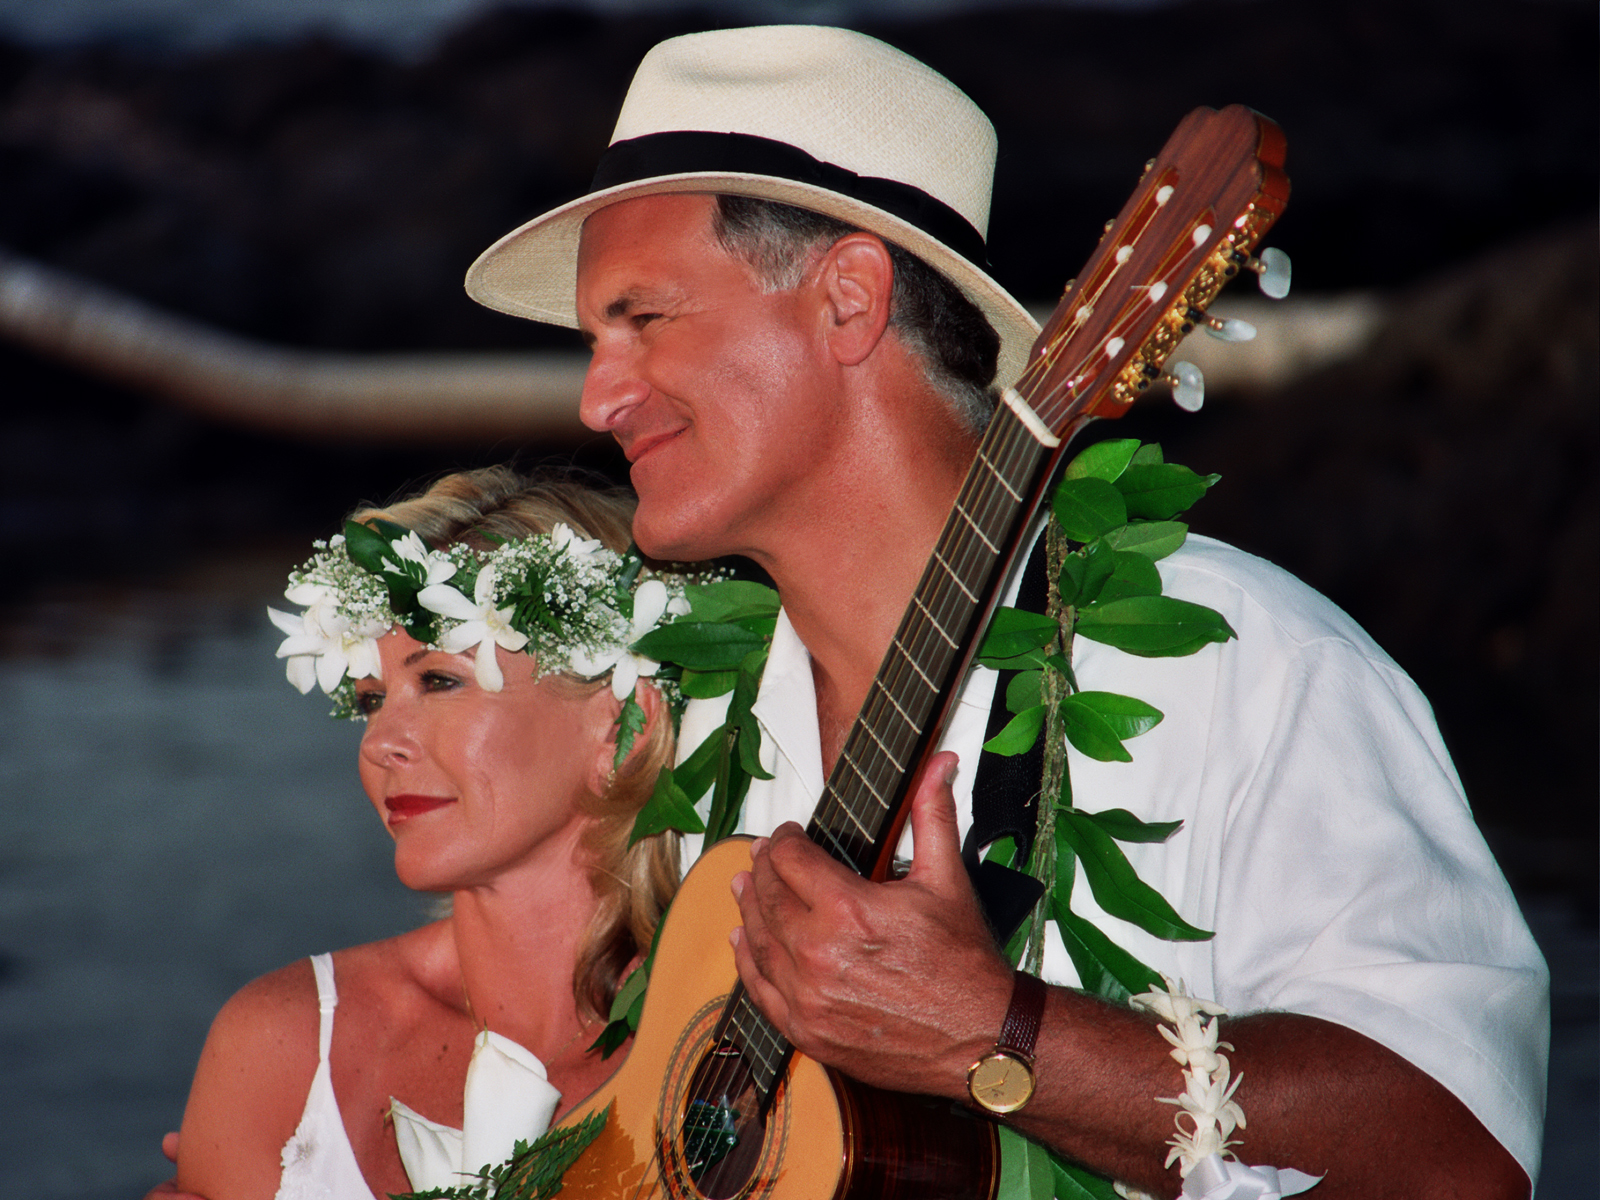 Jeff and Lisa Linsky Perform on Water Island April 23